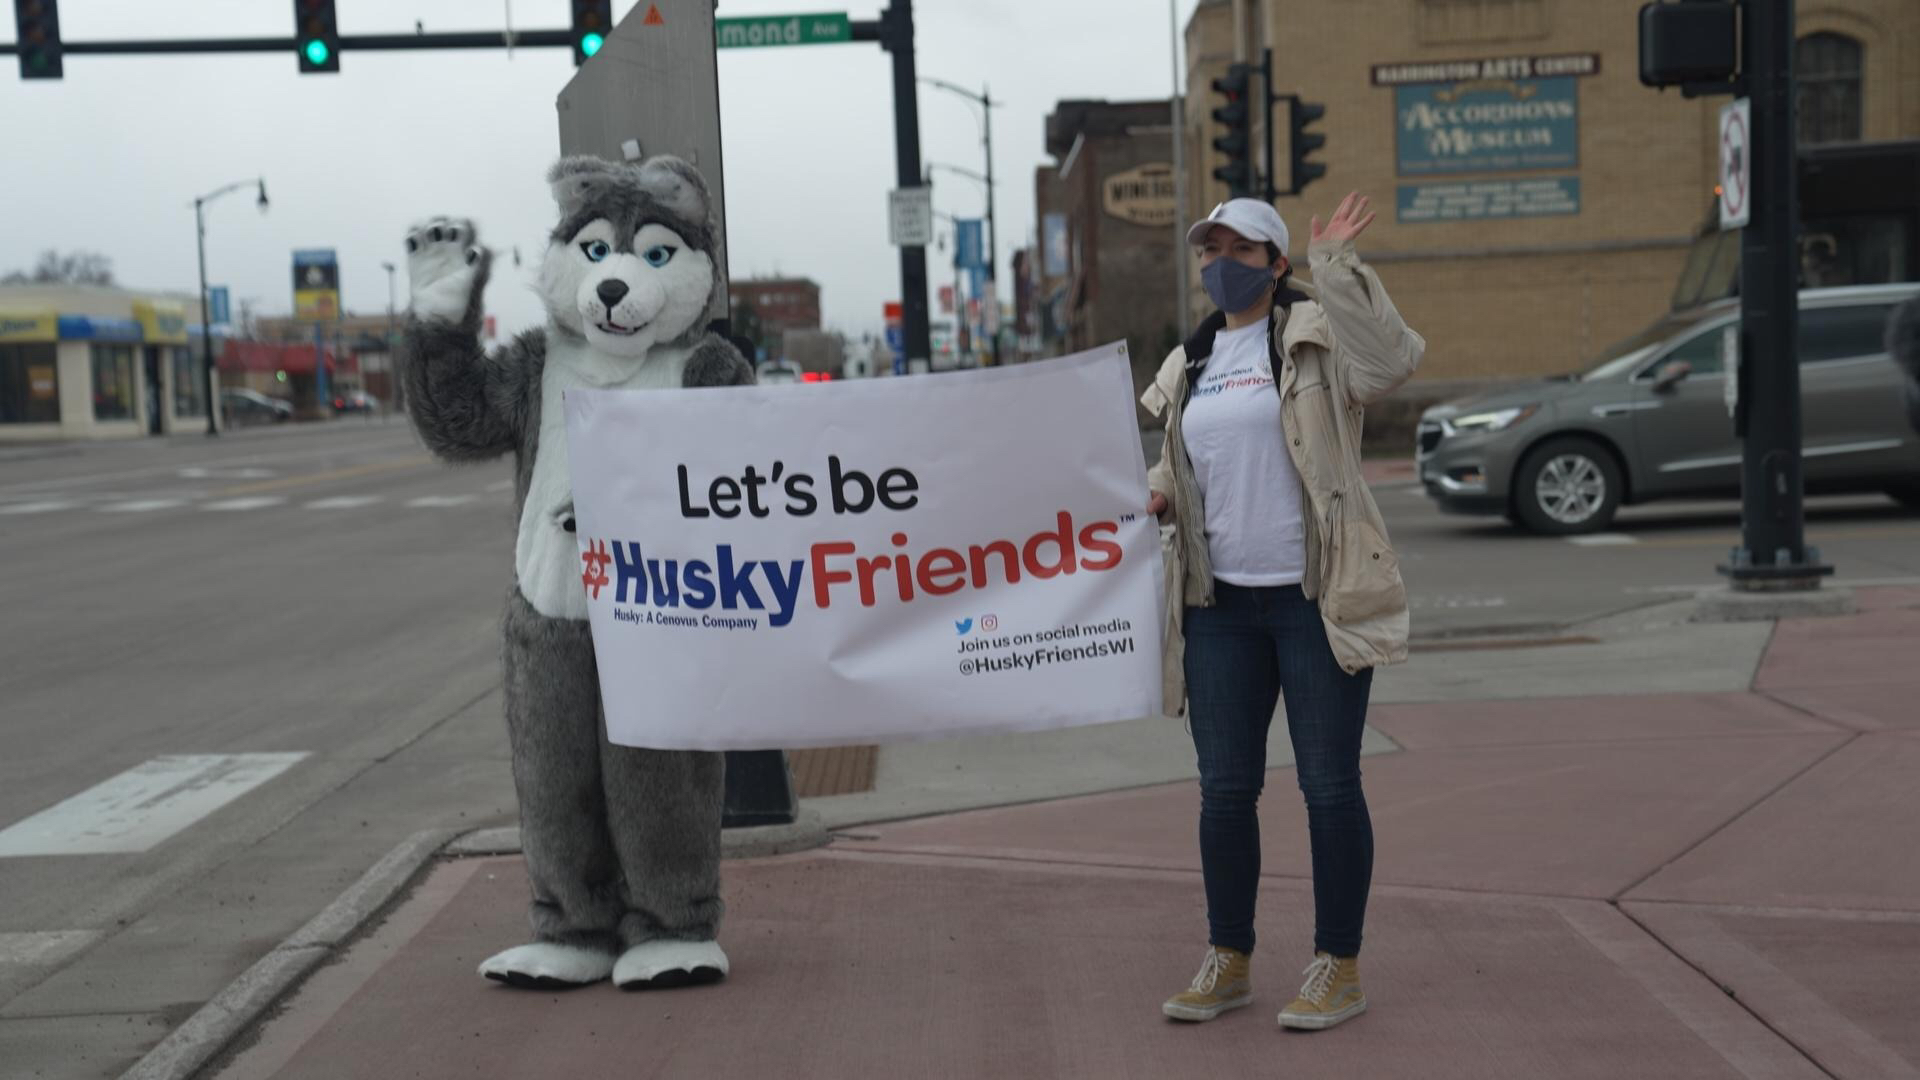 A person dressed as a Husky and a woman walk holding a sign that says, "Let's be #HuskyFriends"